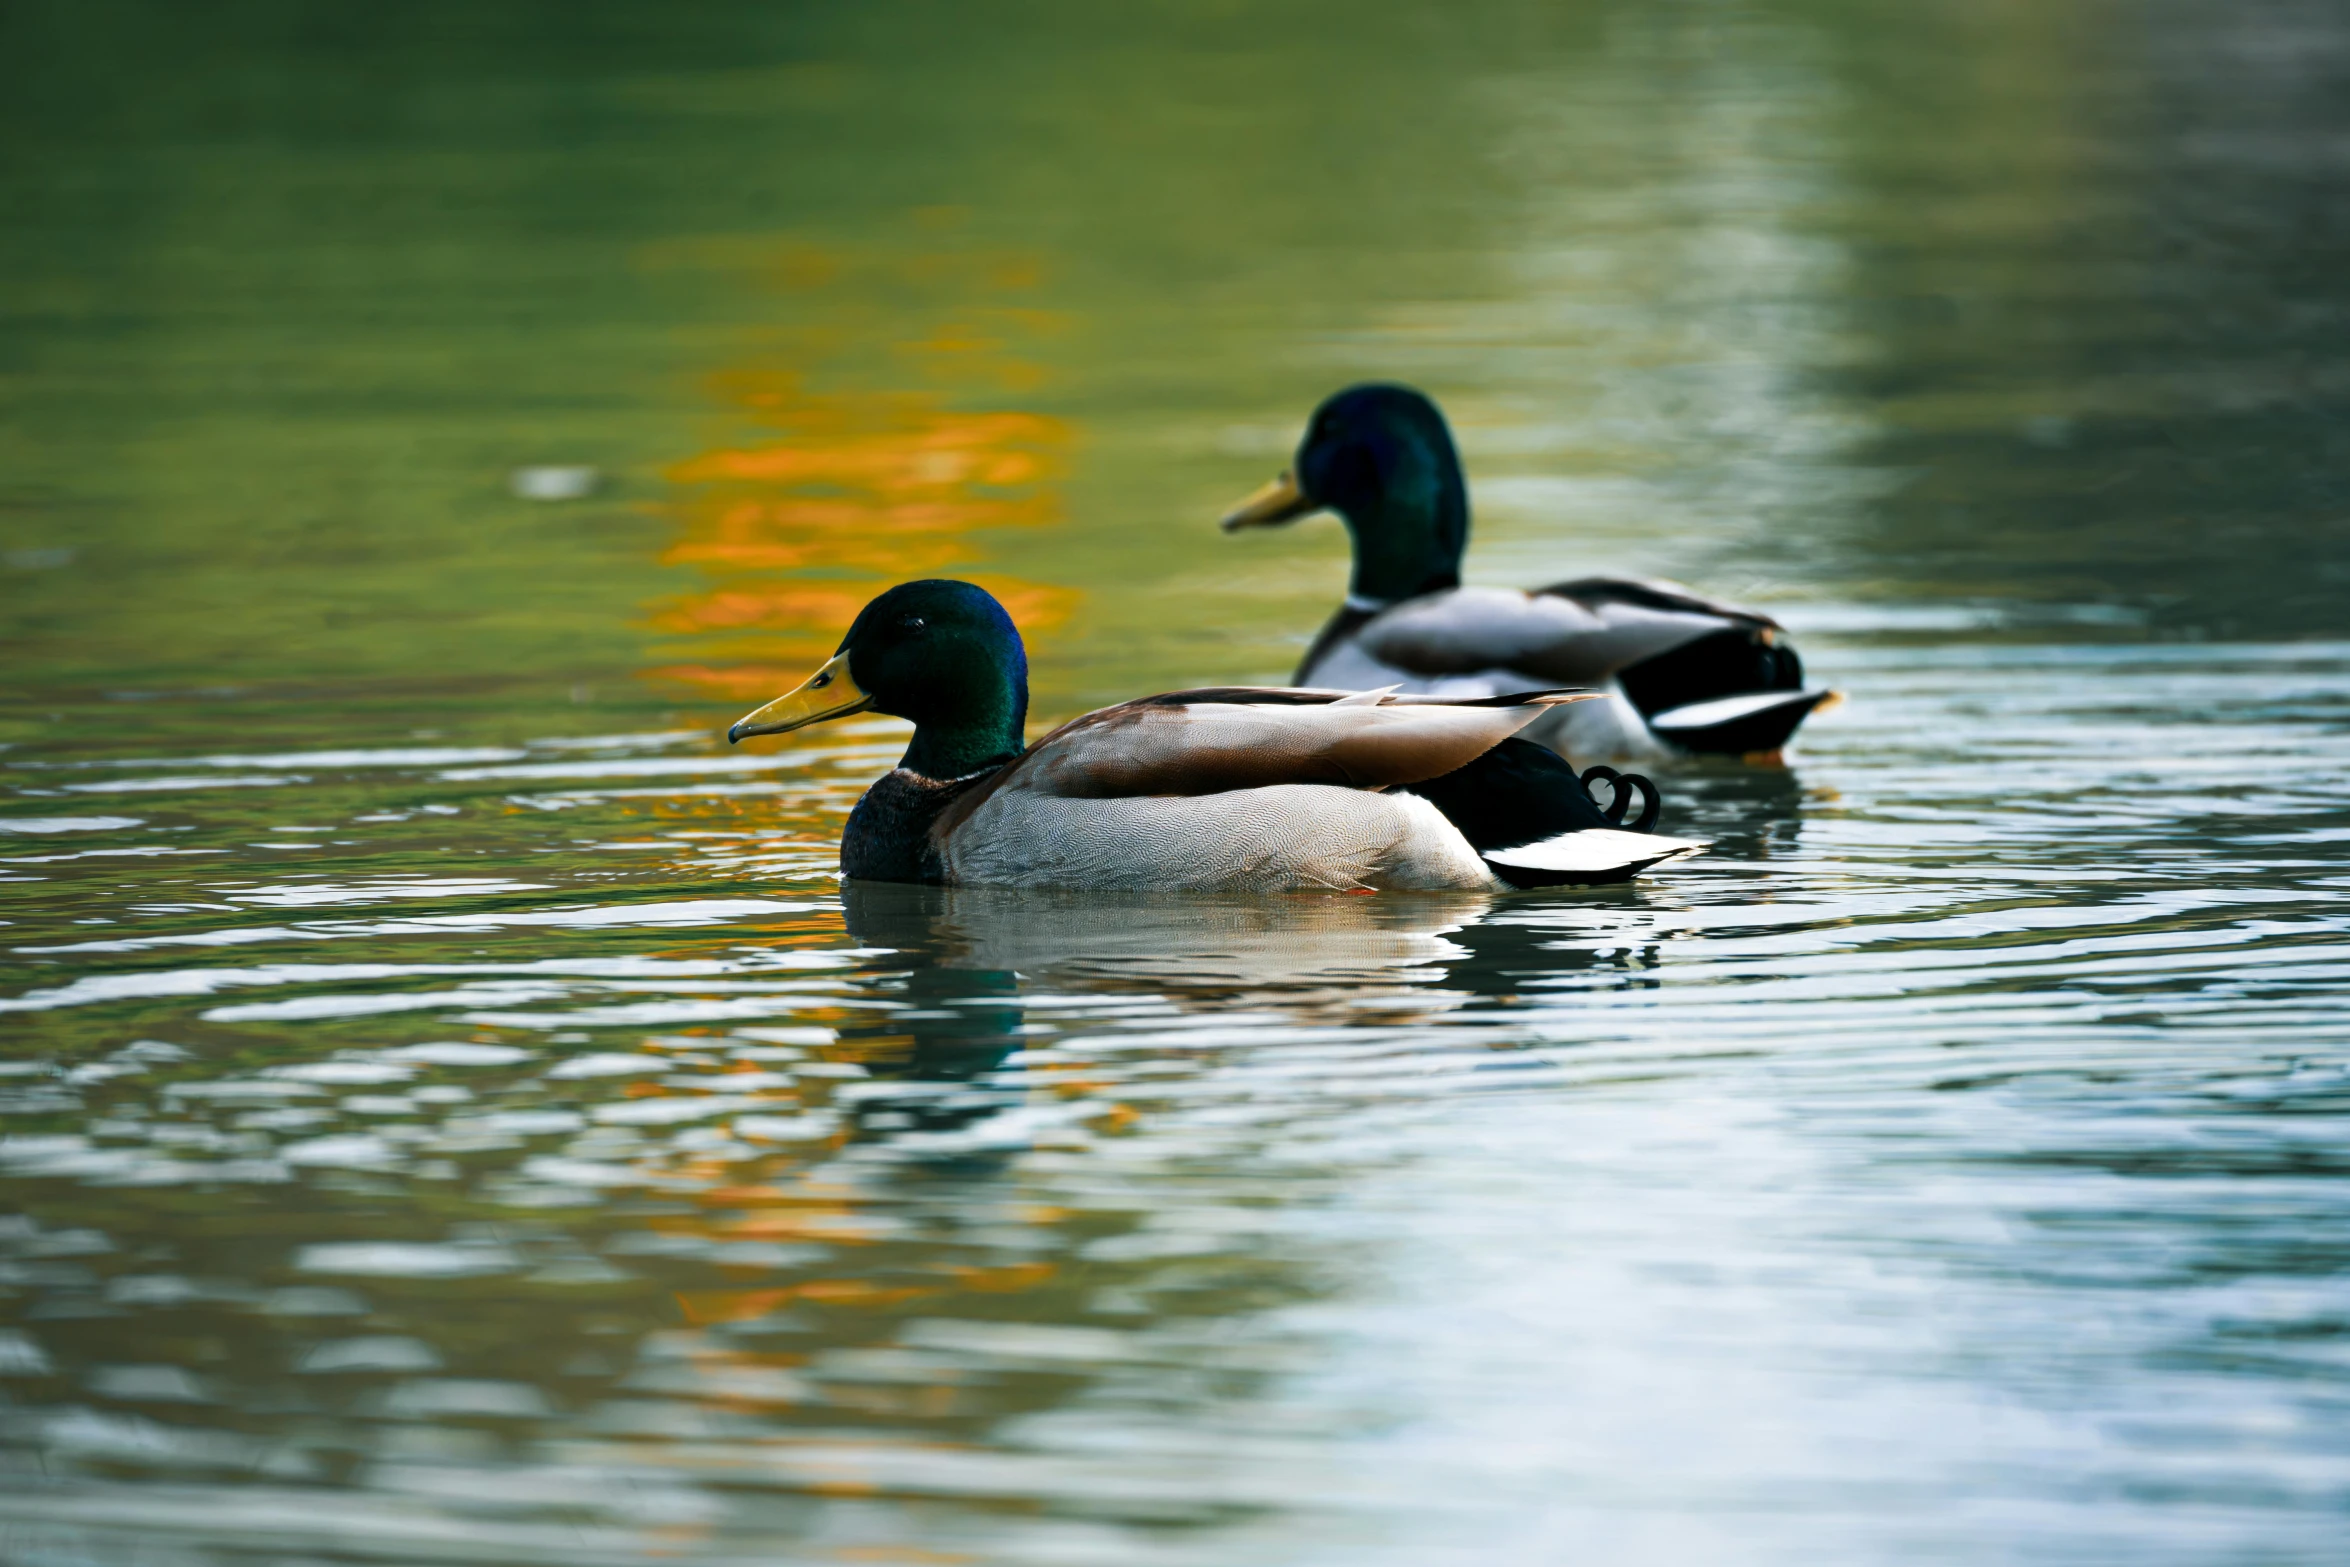 three ducks are floating in the water together